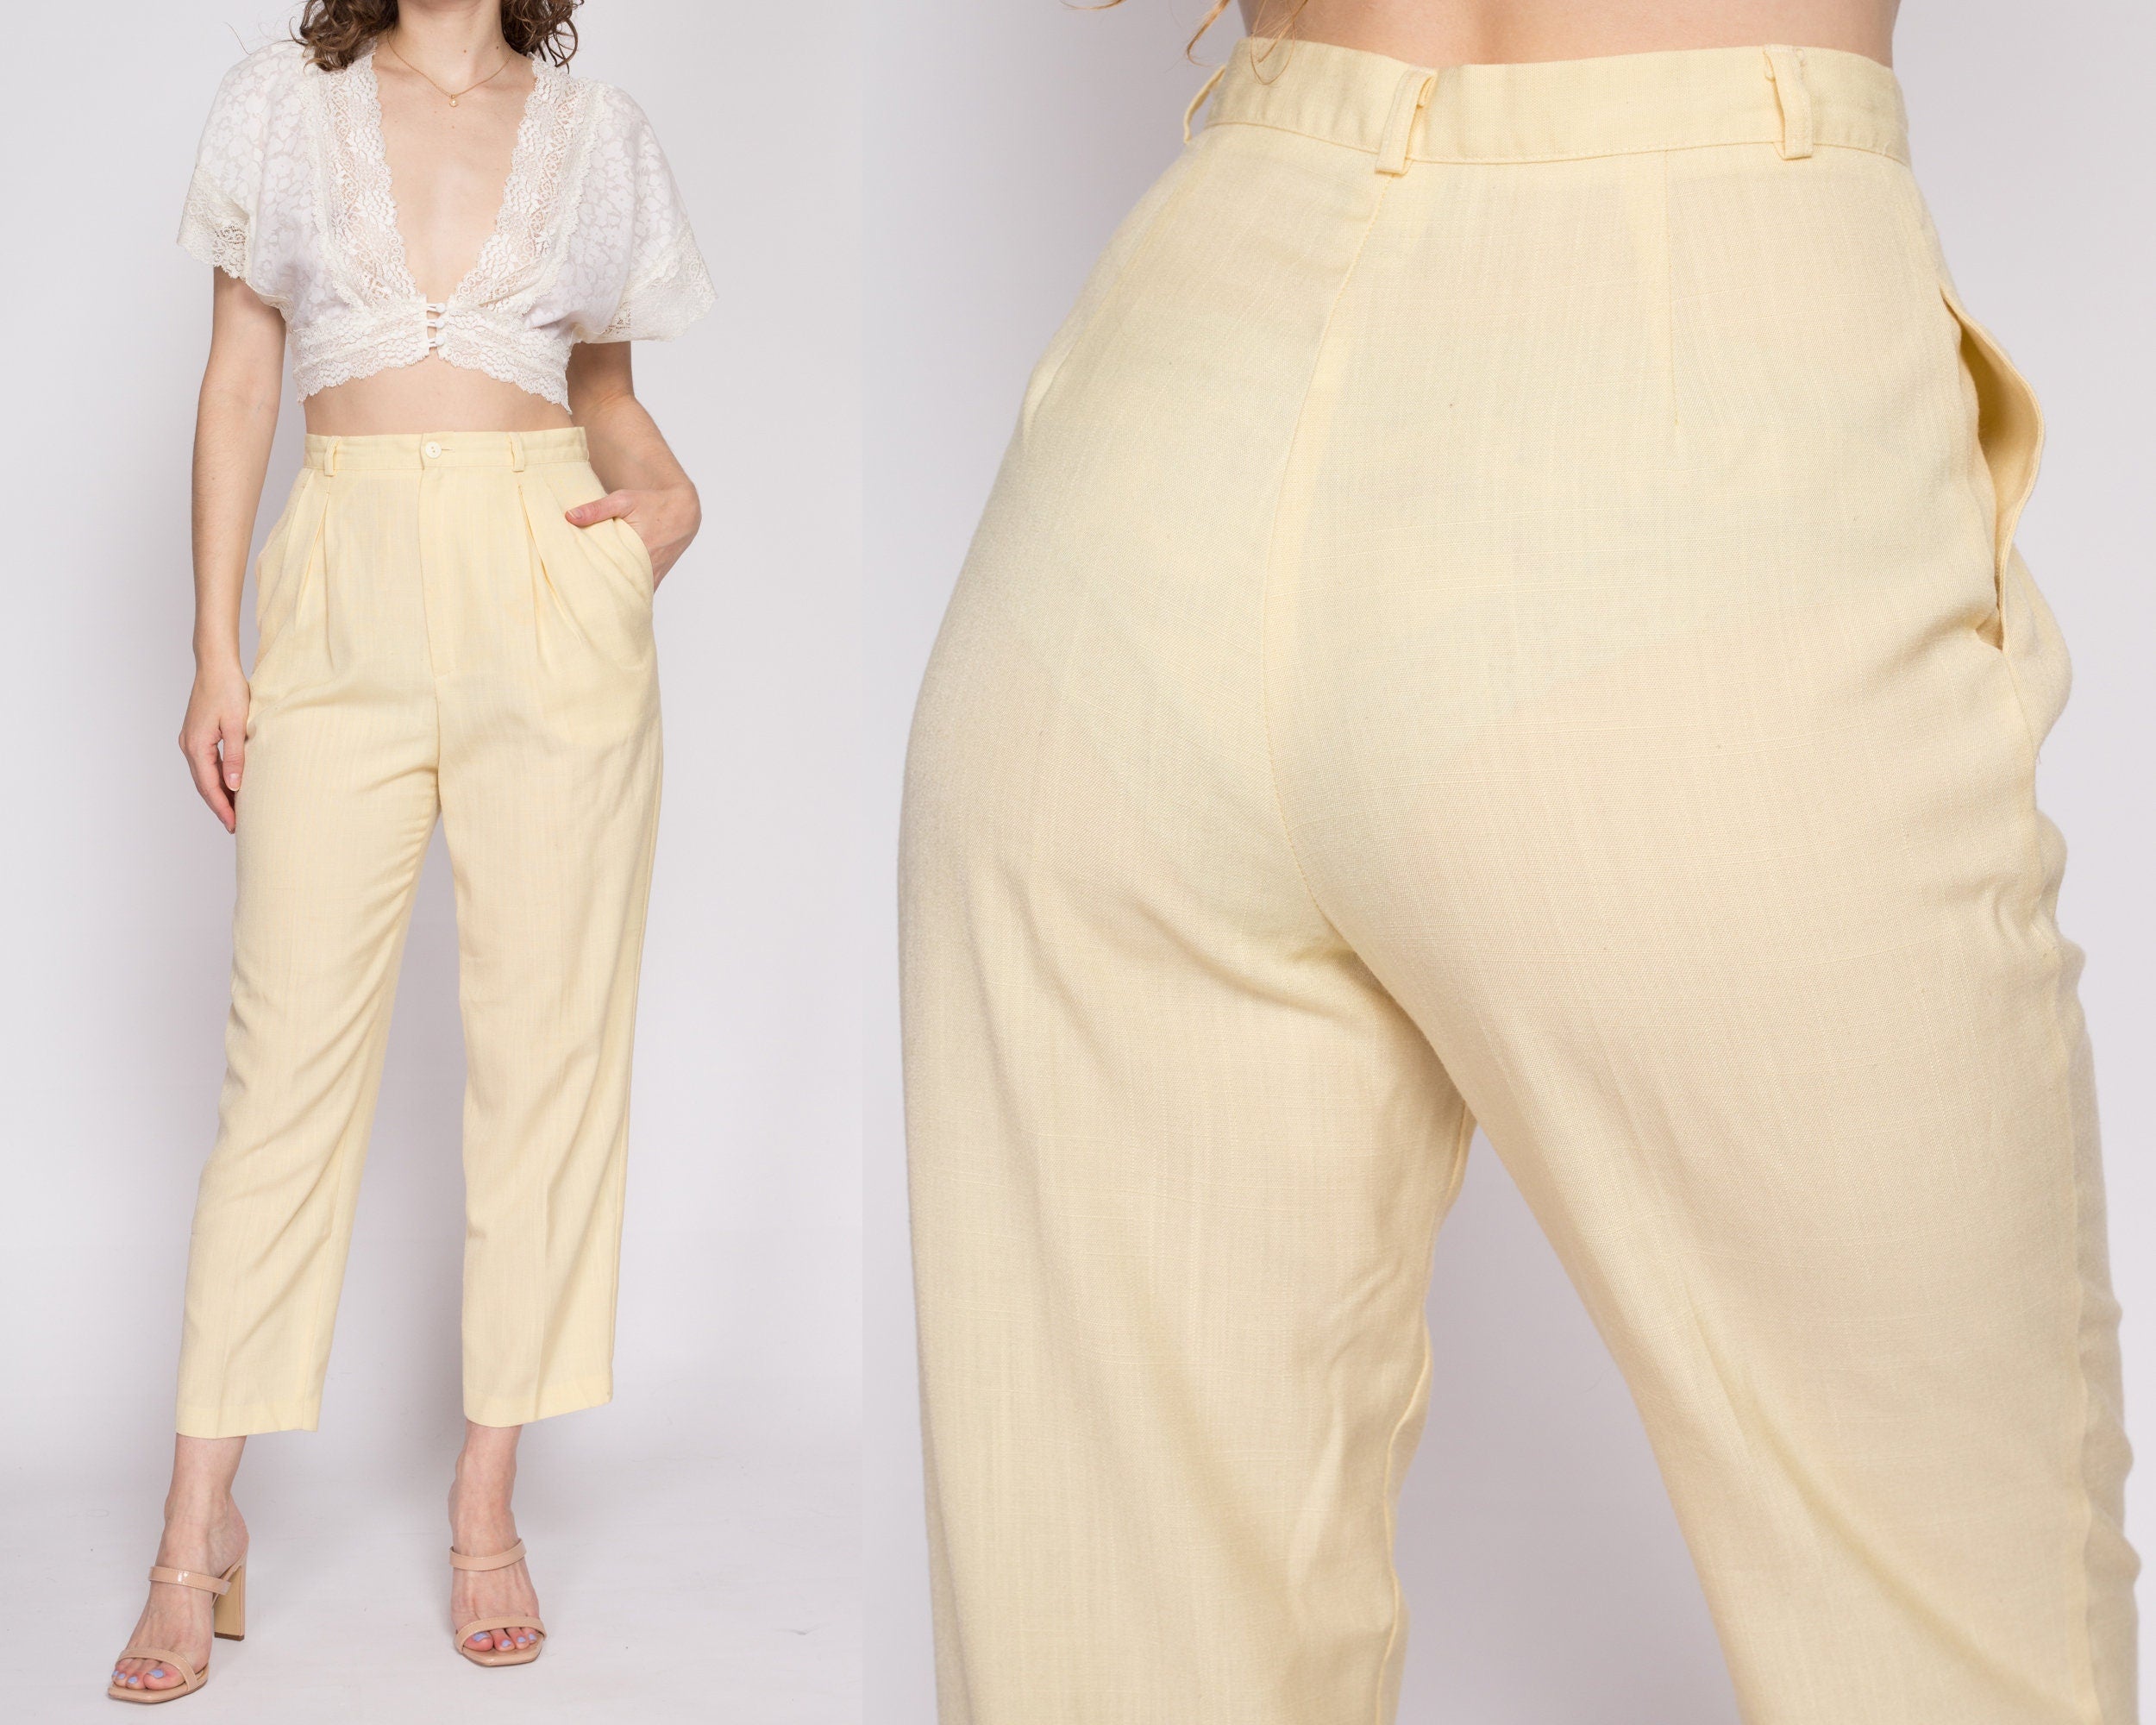 It's Strictly Business Pants, Beige – Chic Soul